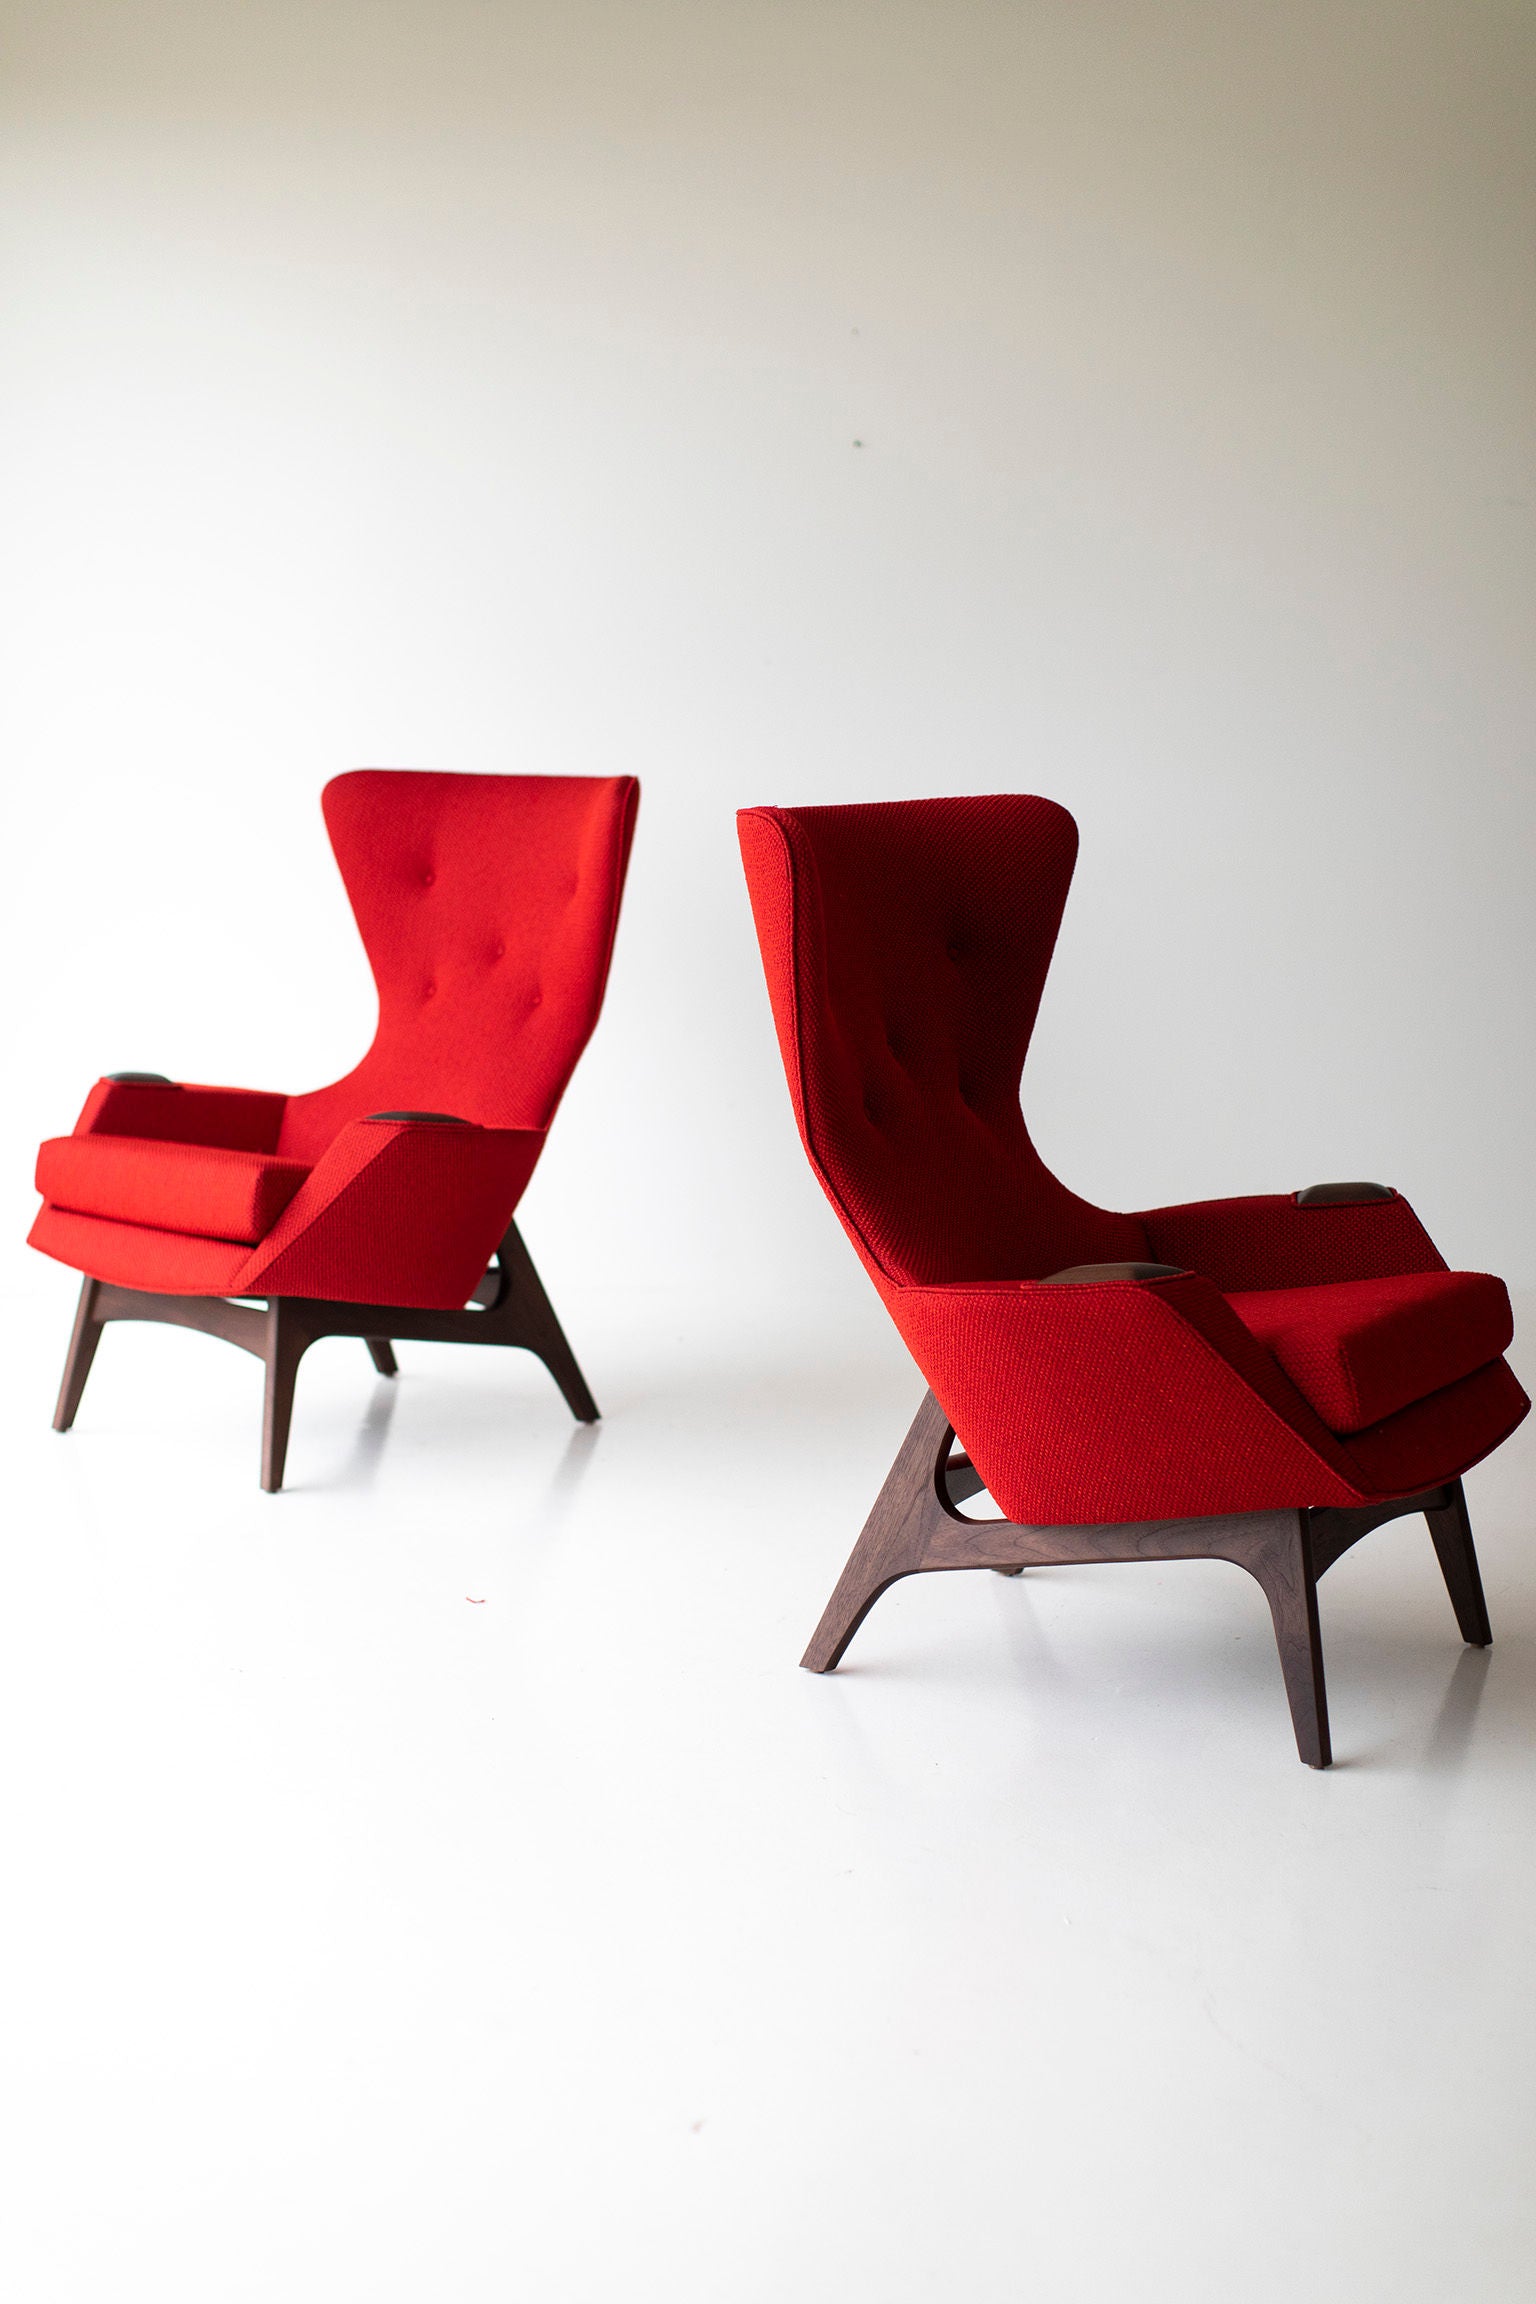 0T3A8903-Red-Wing-Chairs-01